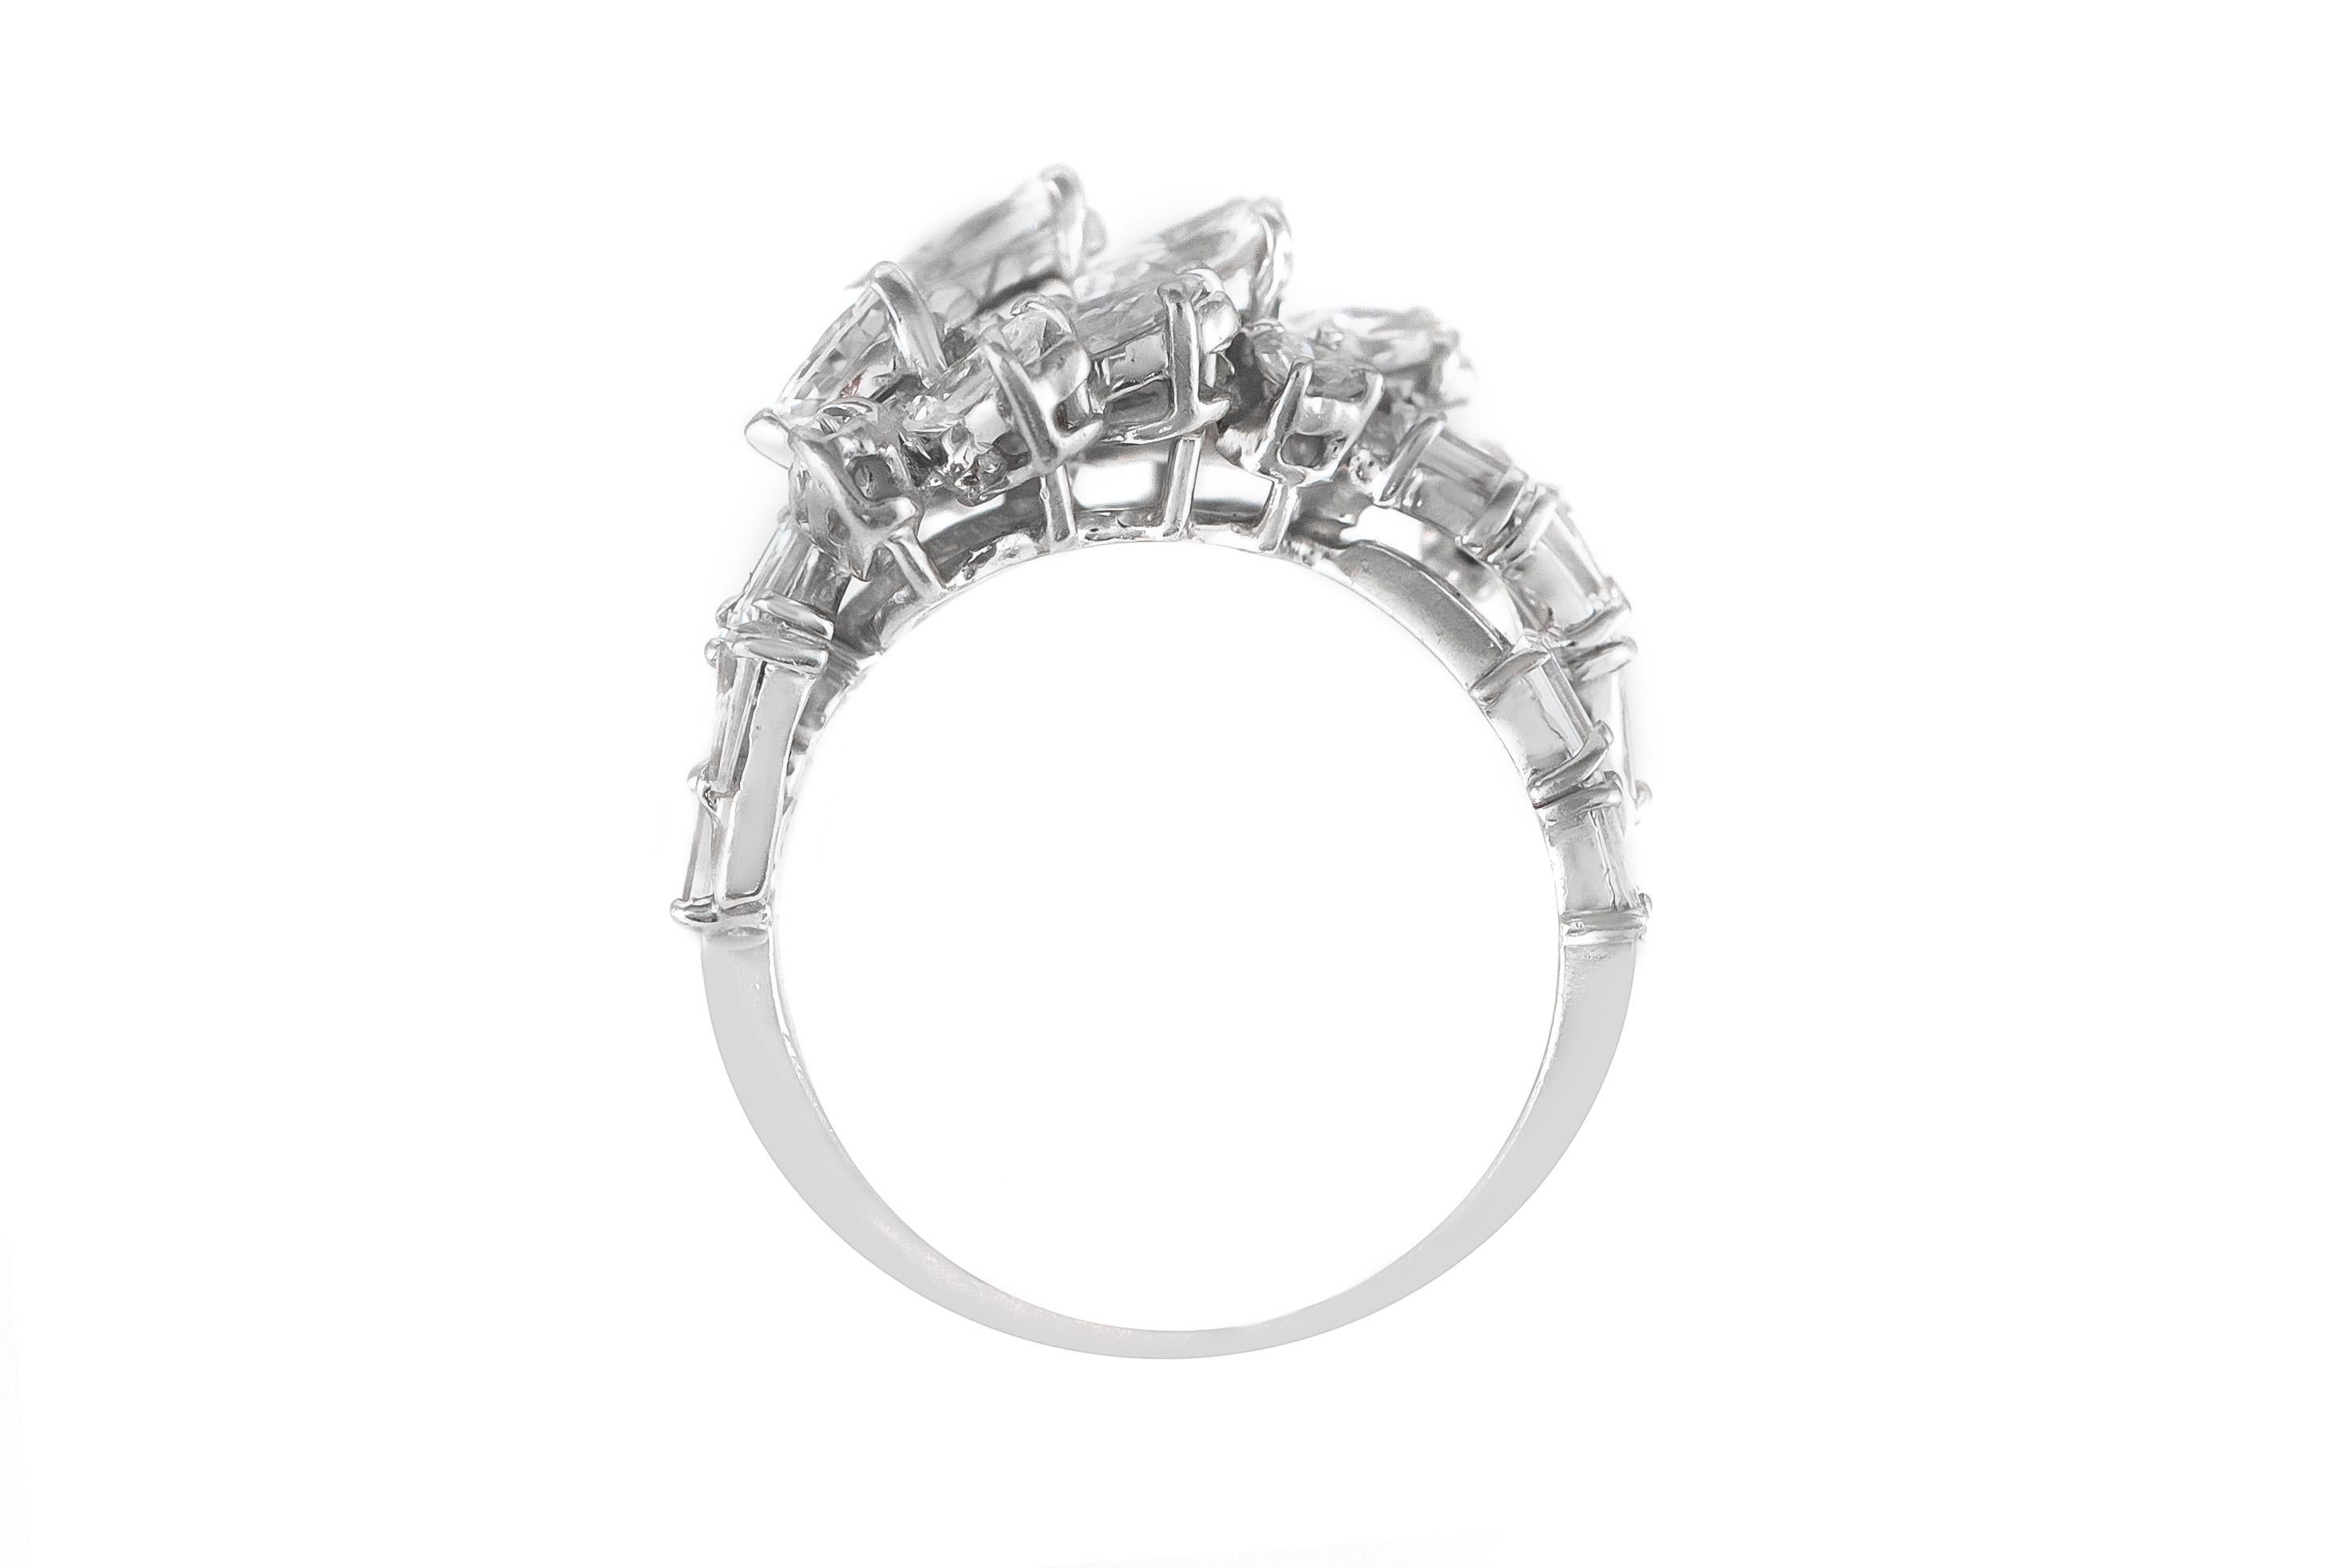 The ring is finely crafted in platinum with diamonds weighing approximately total of 2.25 carat.
Size 7.00 ( easy to resize )
Circa 1950.
